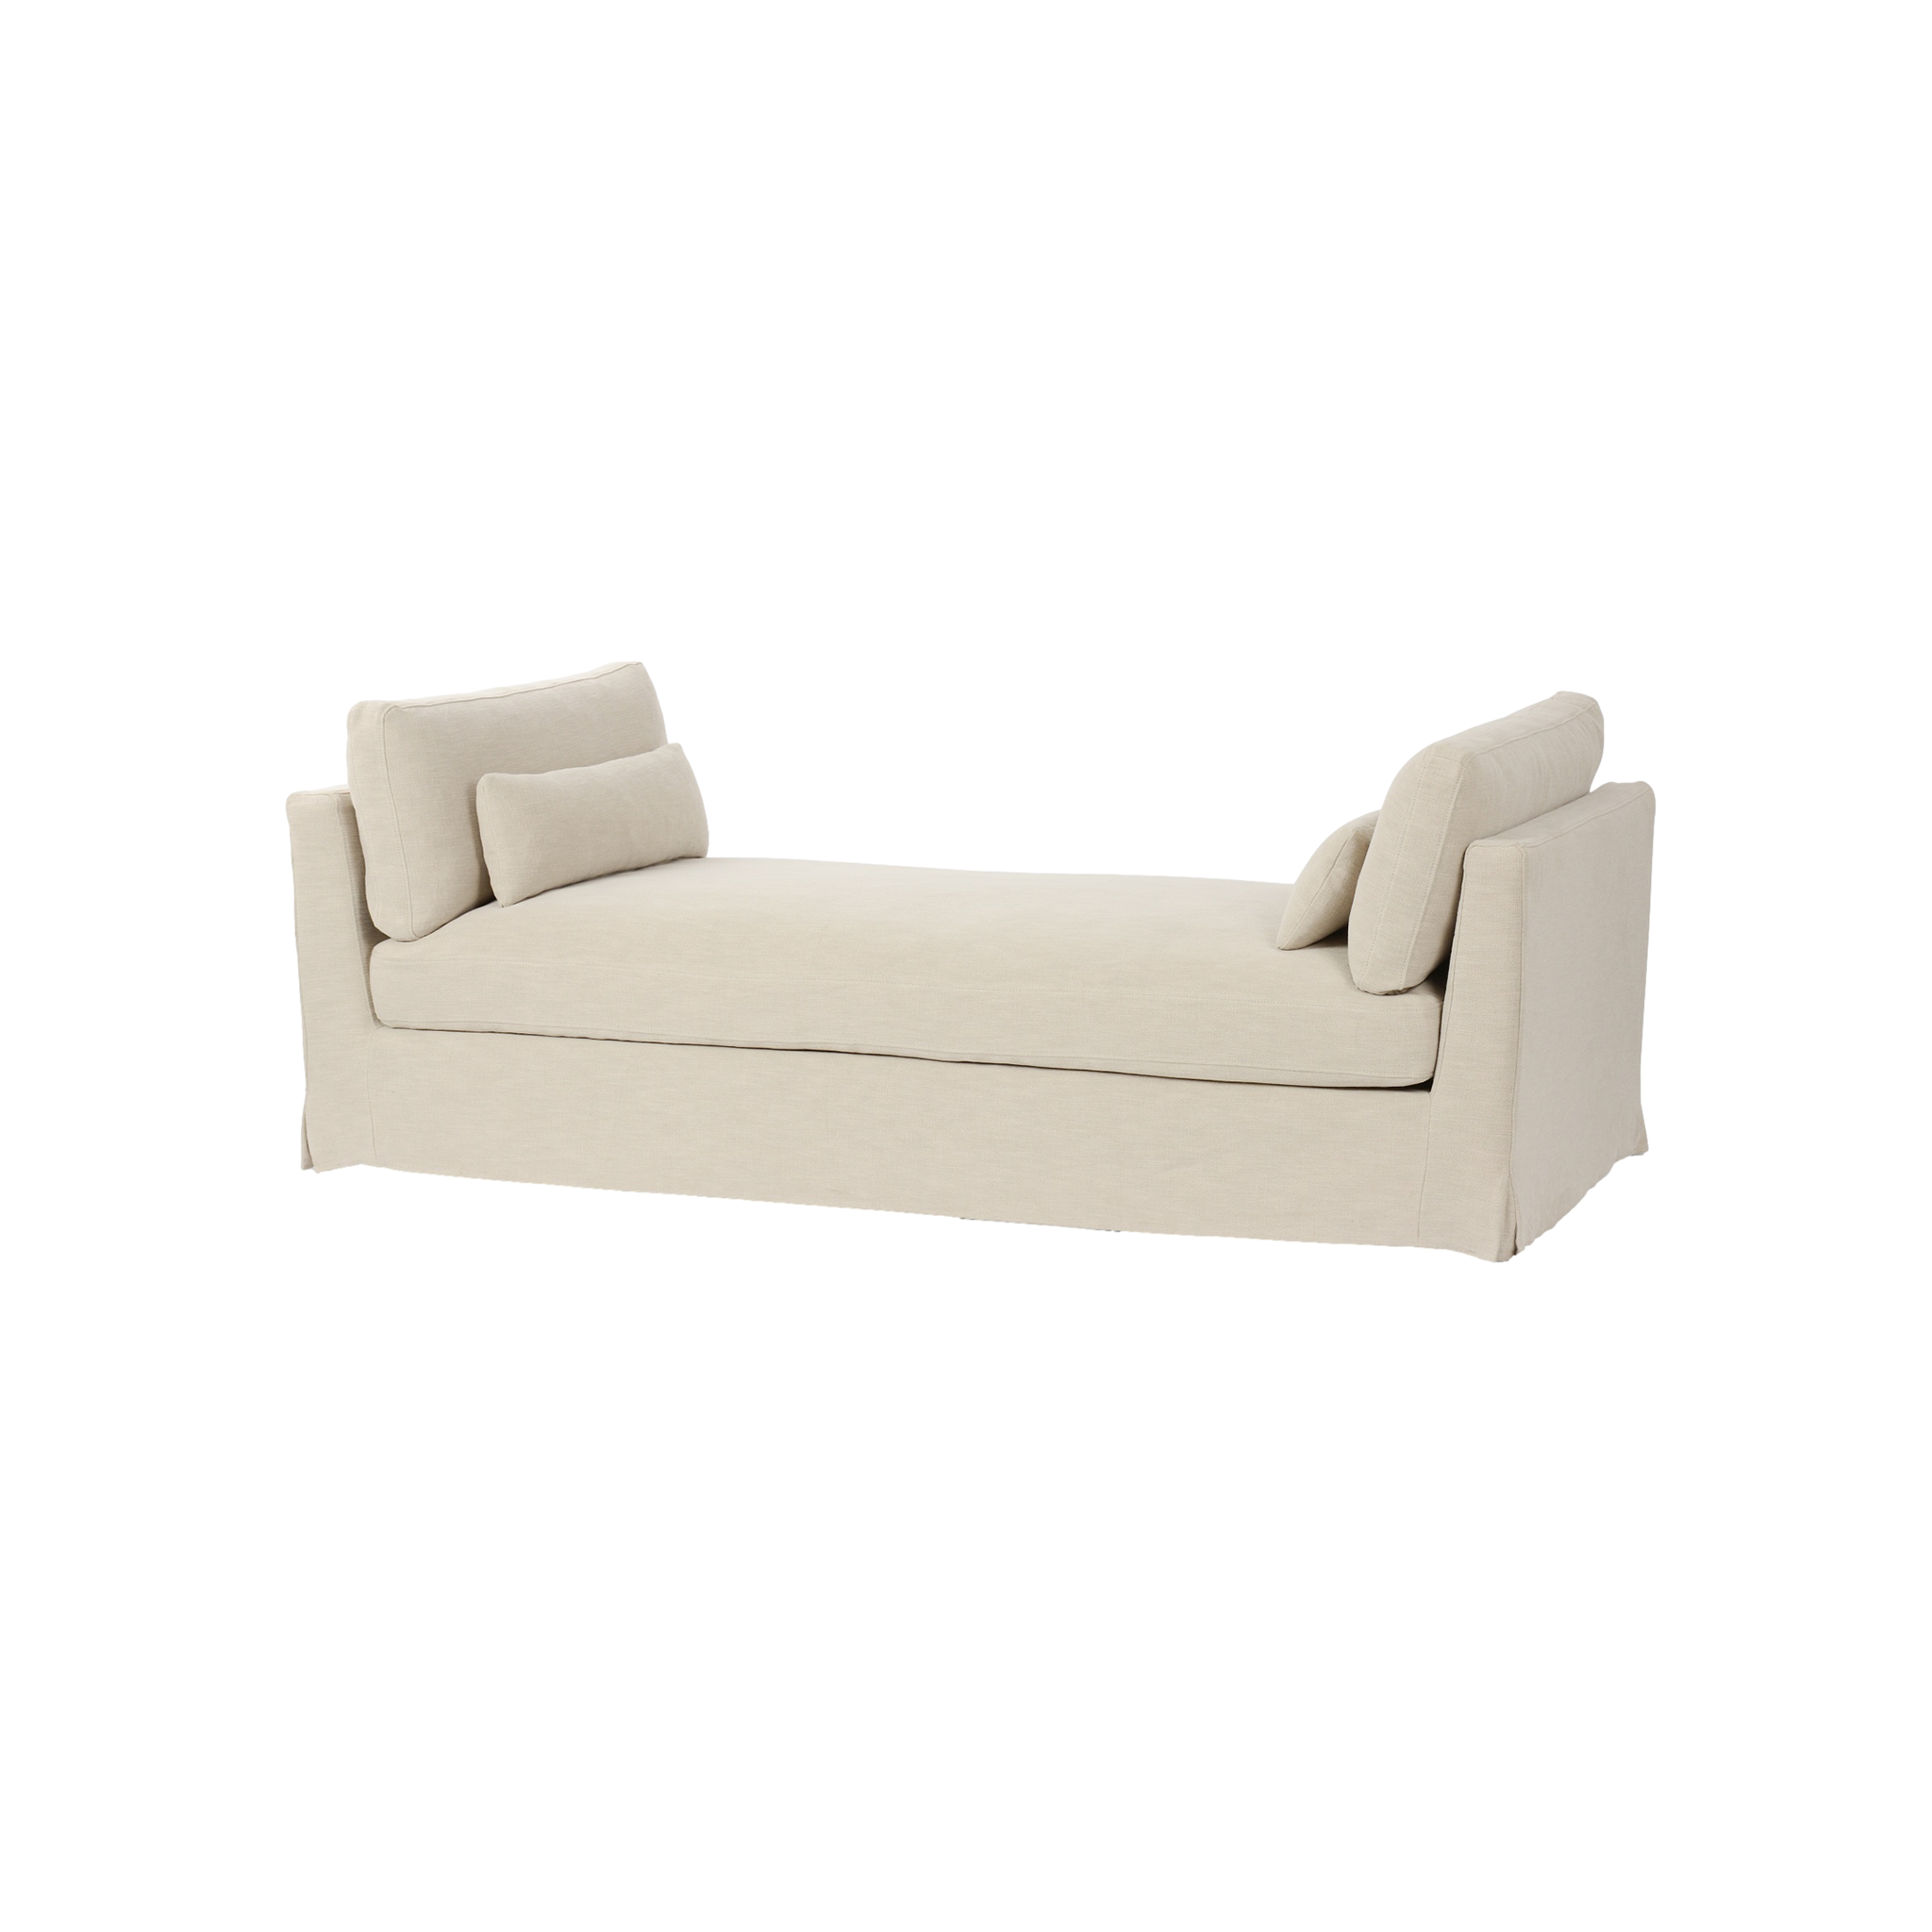 Vianna Slipcover Chaise in Canvas